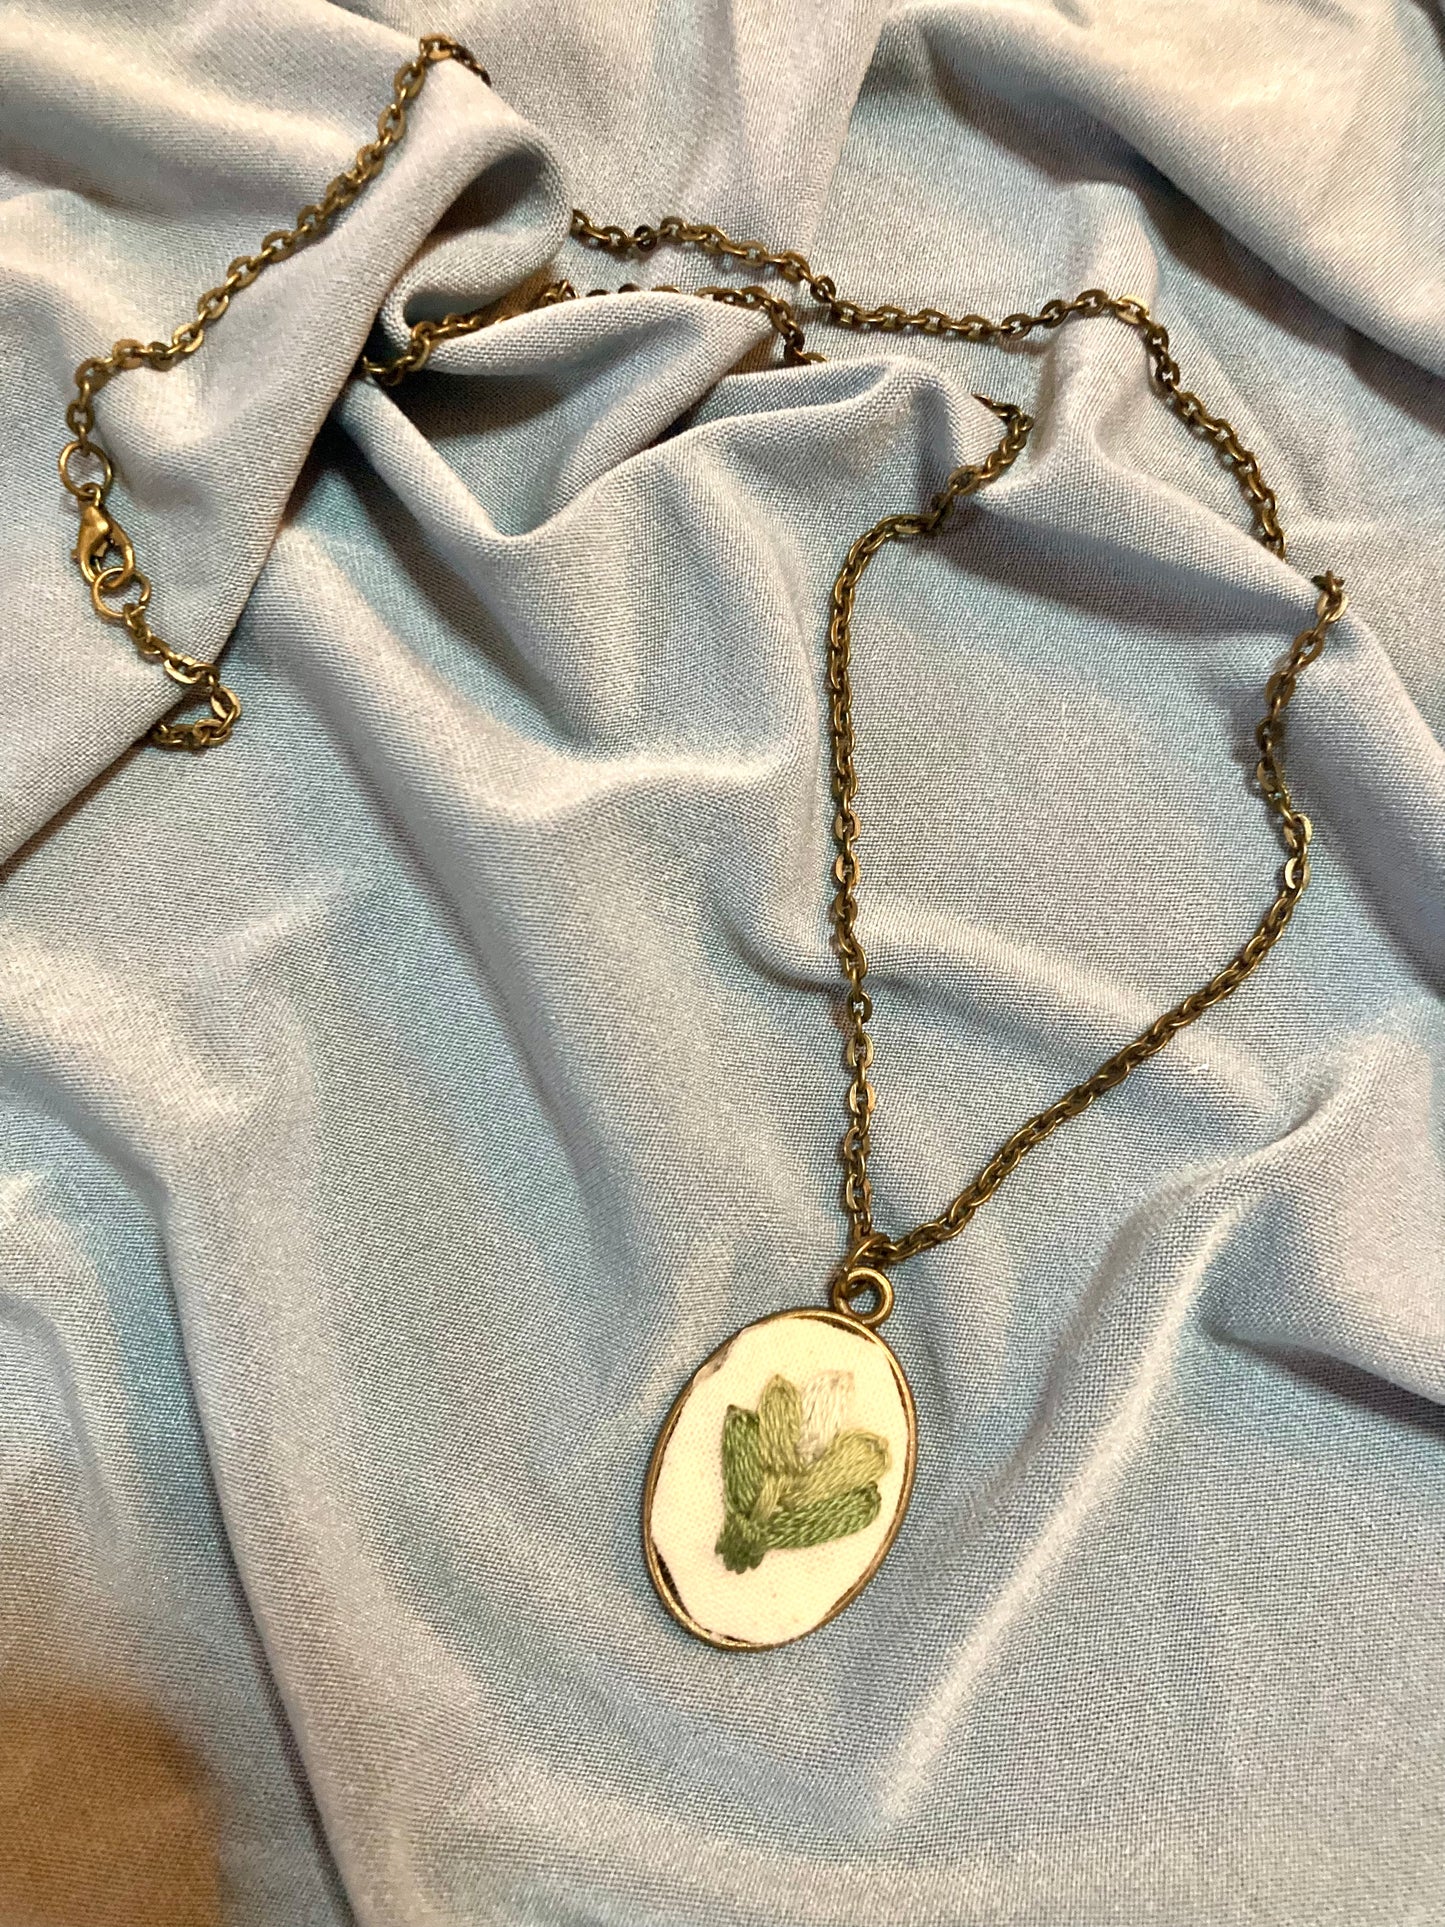 The fern necklace